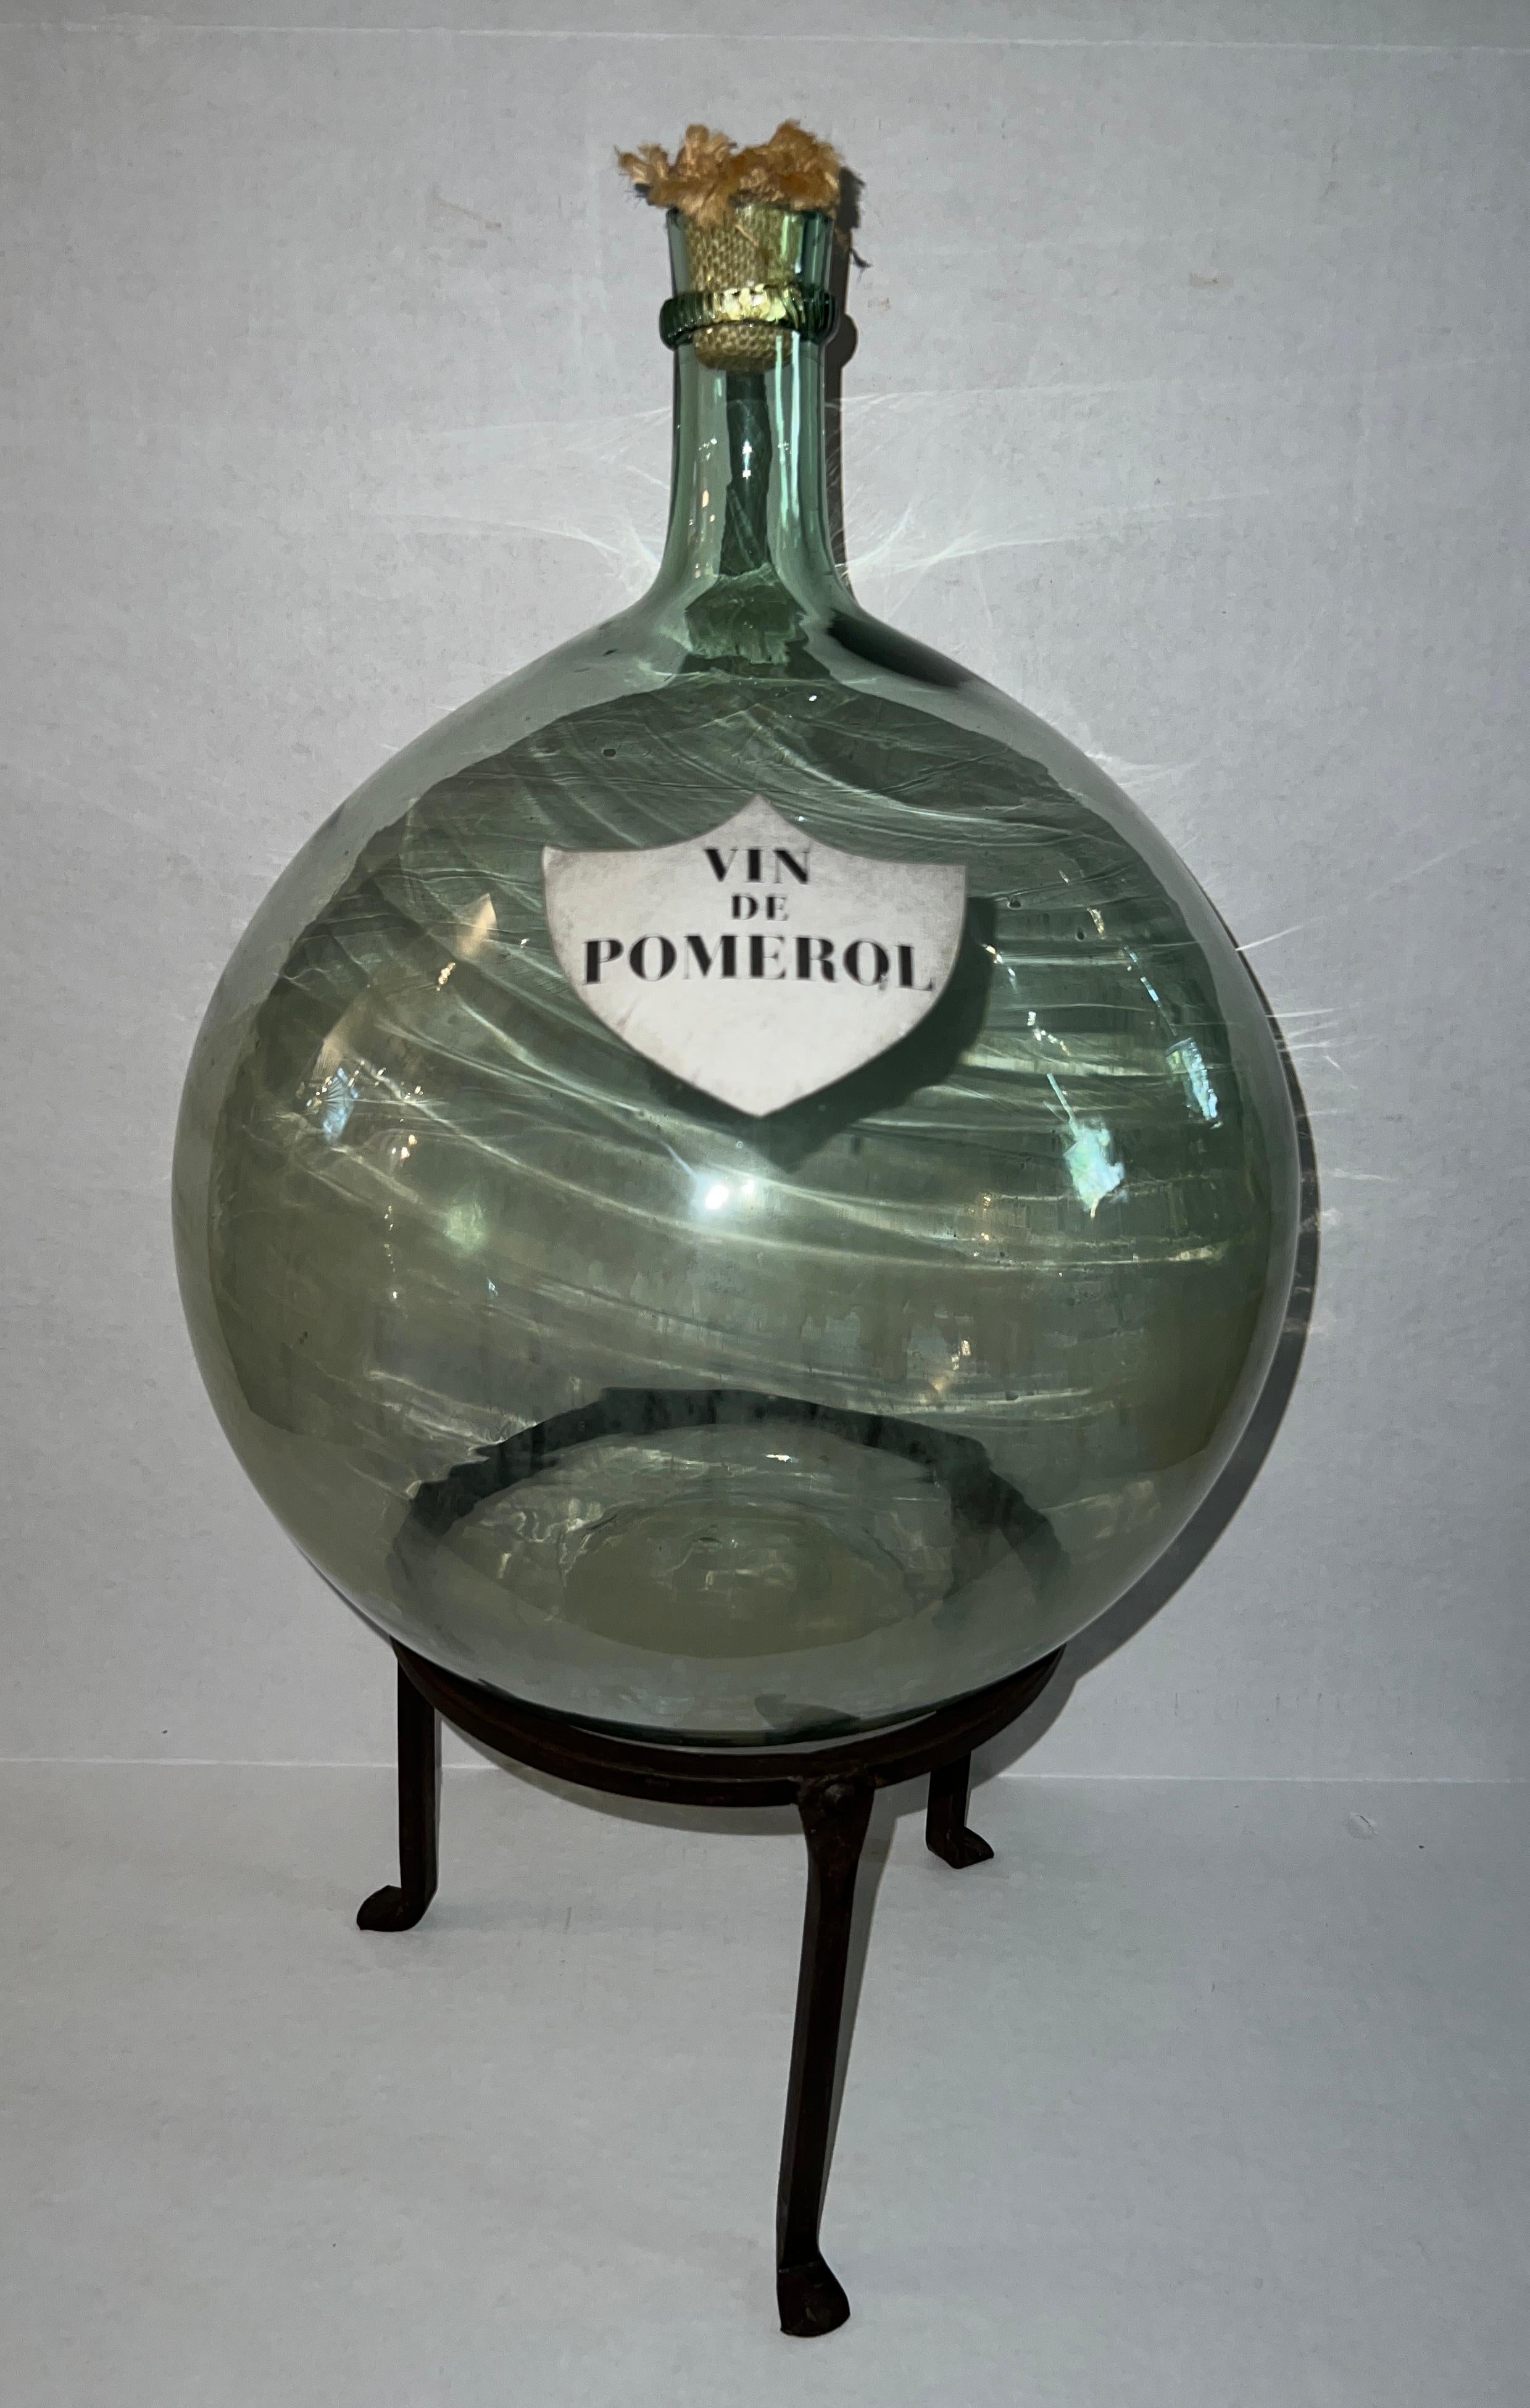 The French Vin De Pomerol Glass Blown Demijohn, standing at 15 inches, is a stunning artisanal masterpiece for wine enthusiasts.

The wrought iron stand is included 